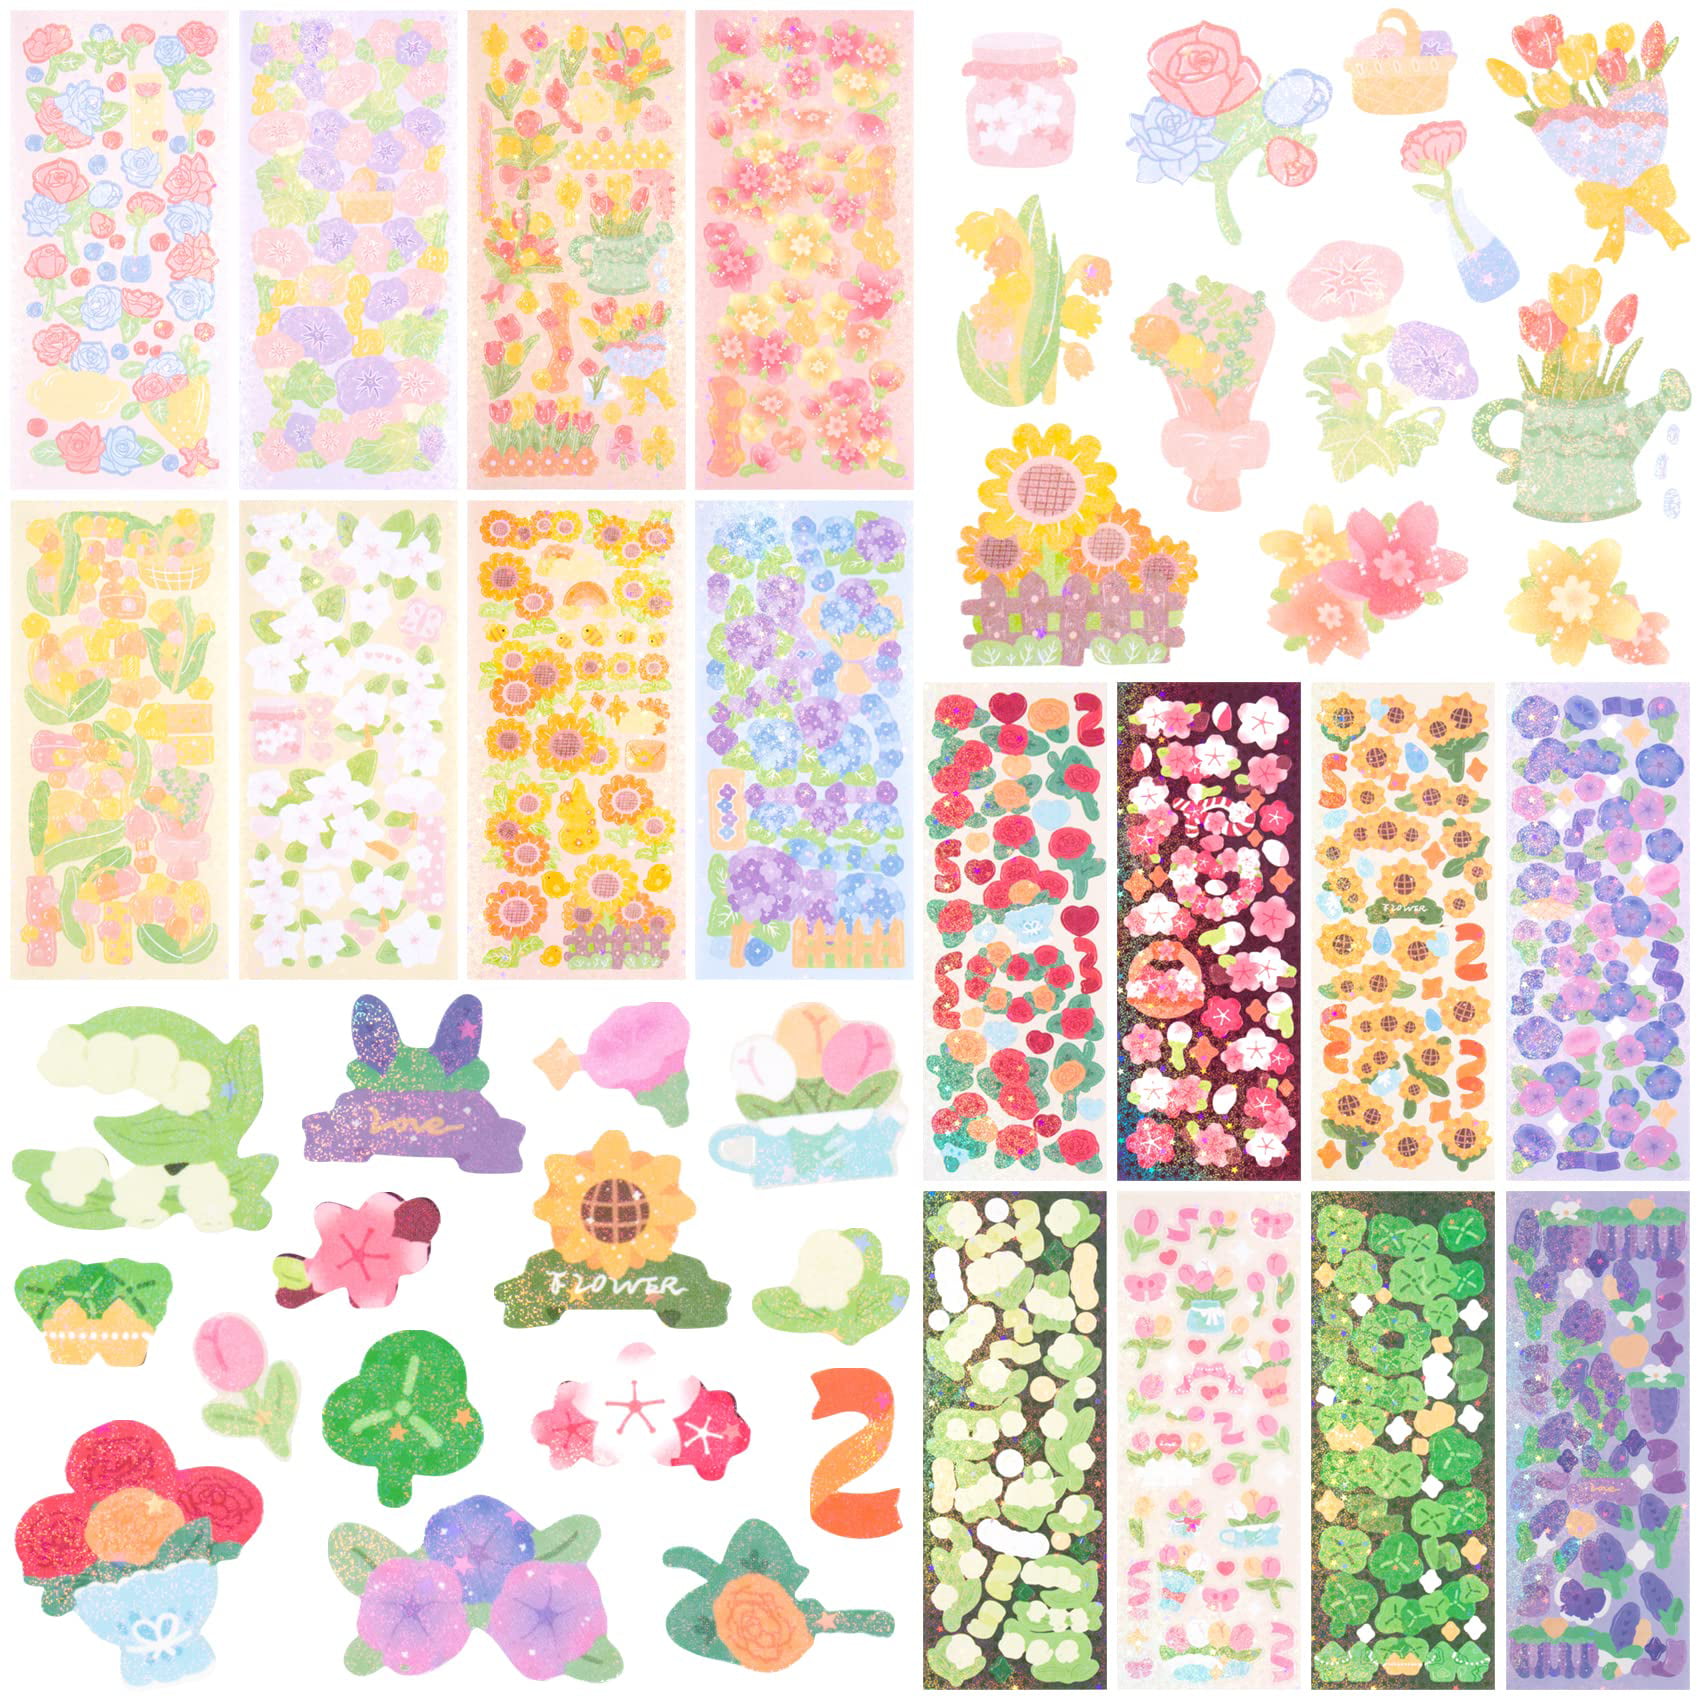 Korean Deco Stickers Set (30 Sheets), Colorful Glitter Stickers